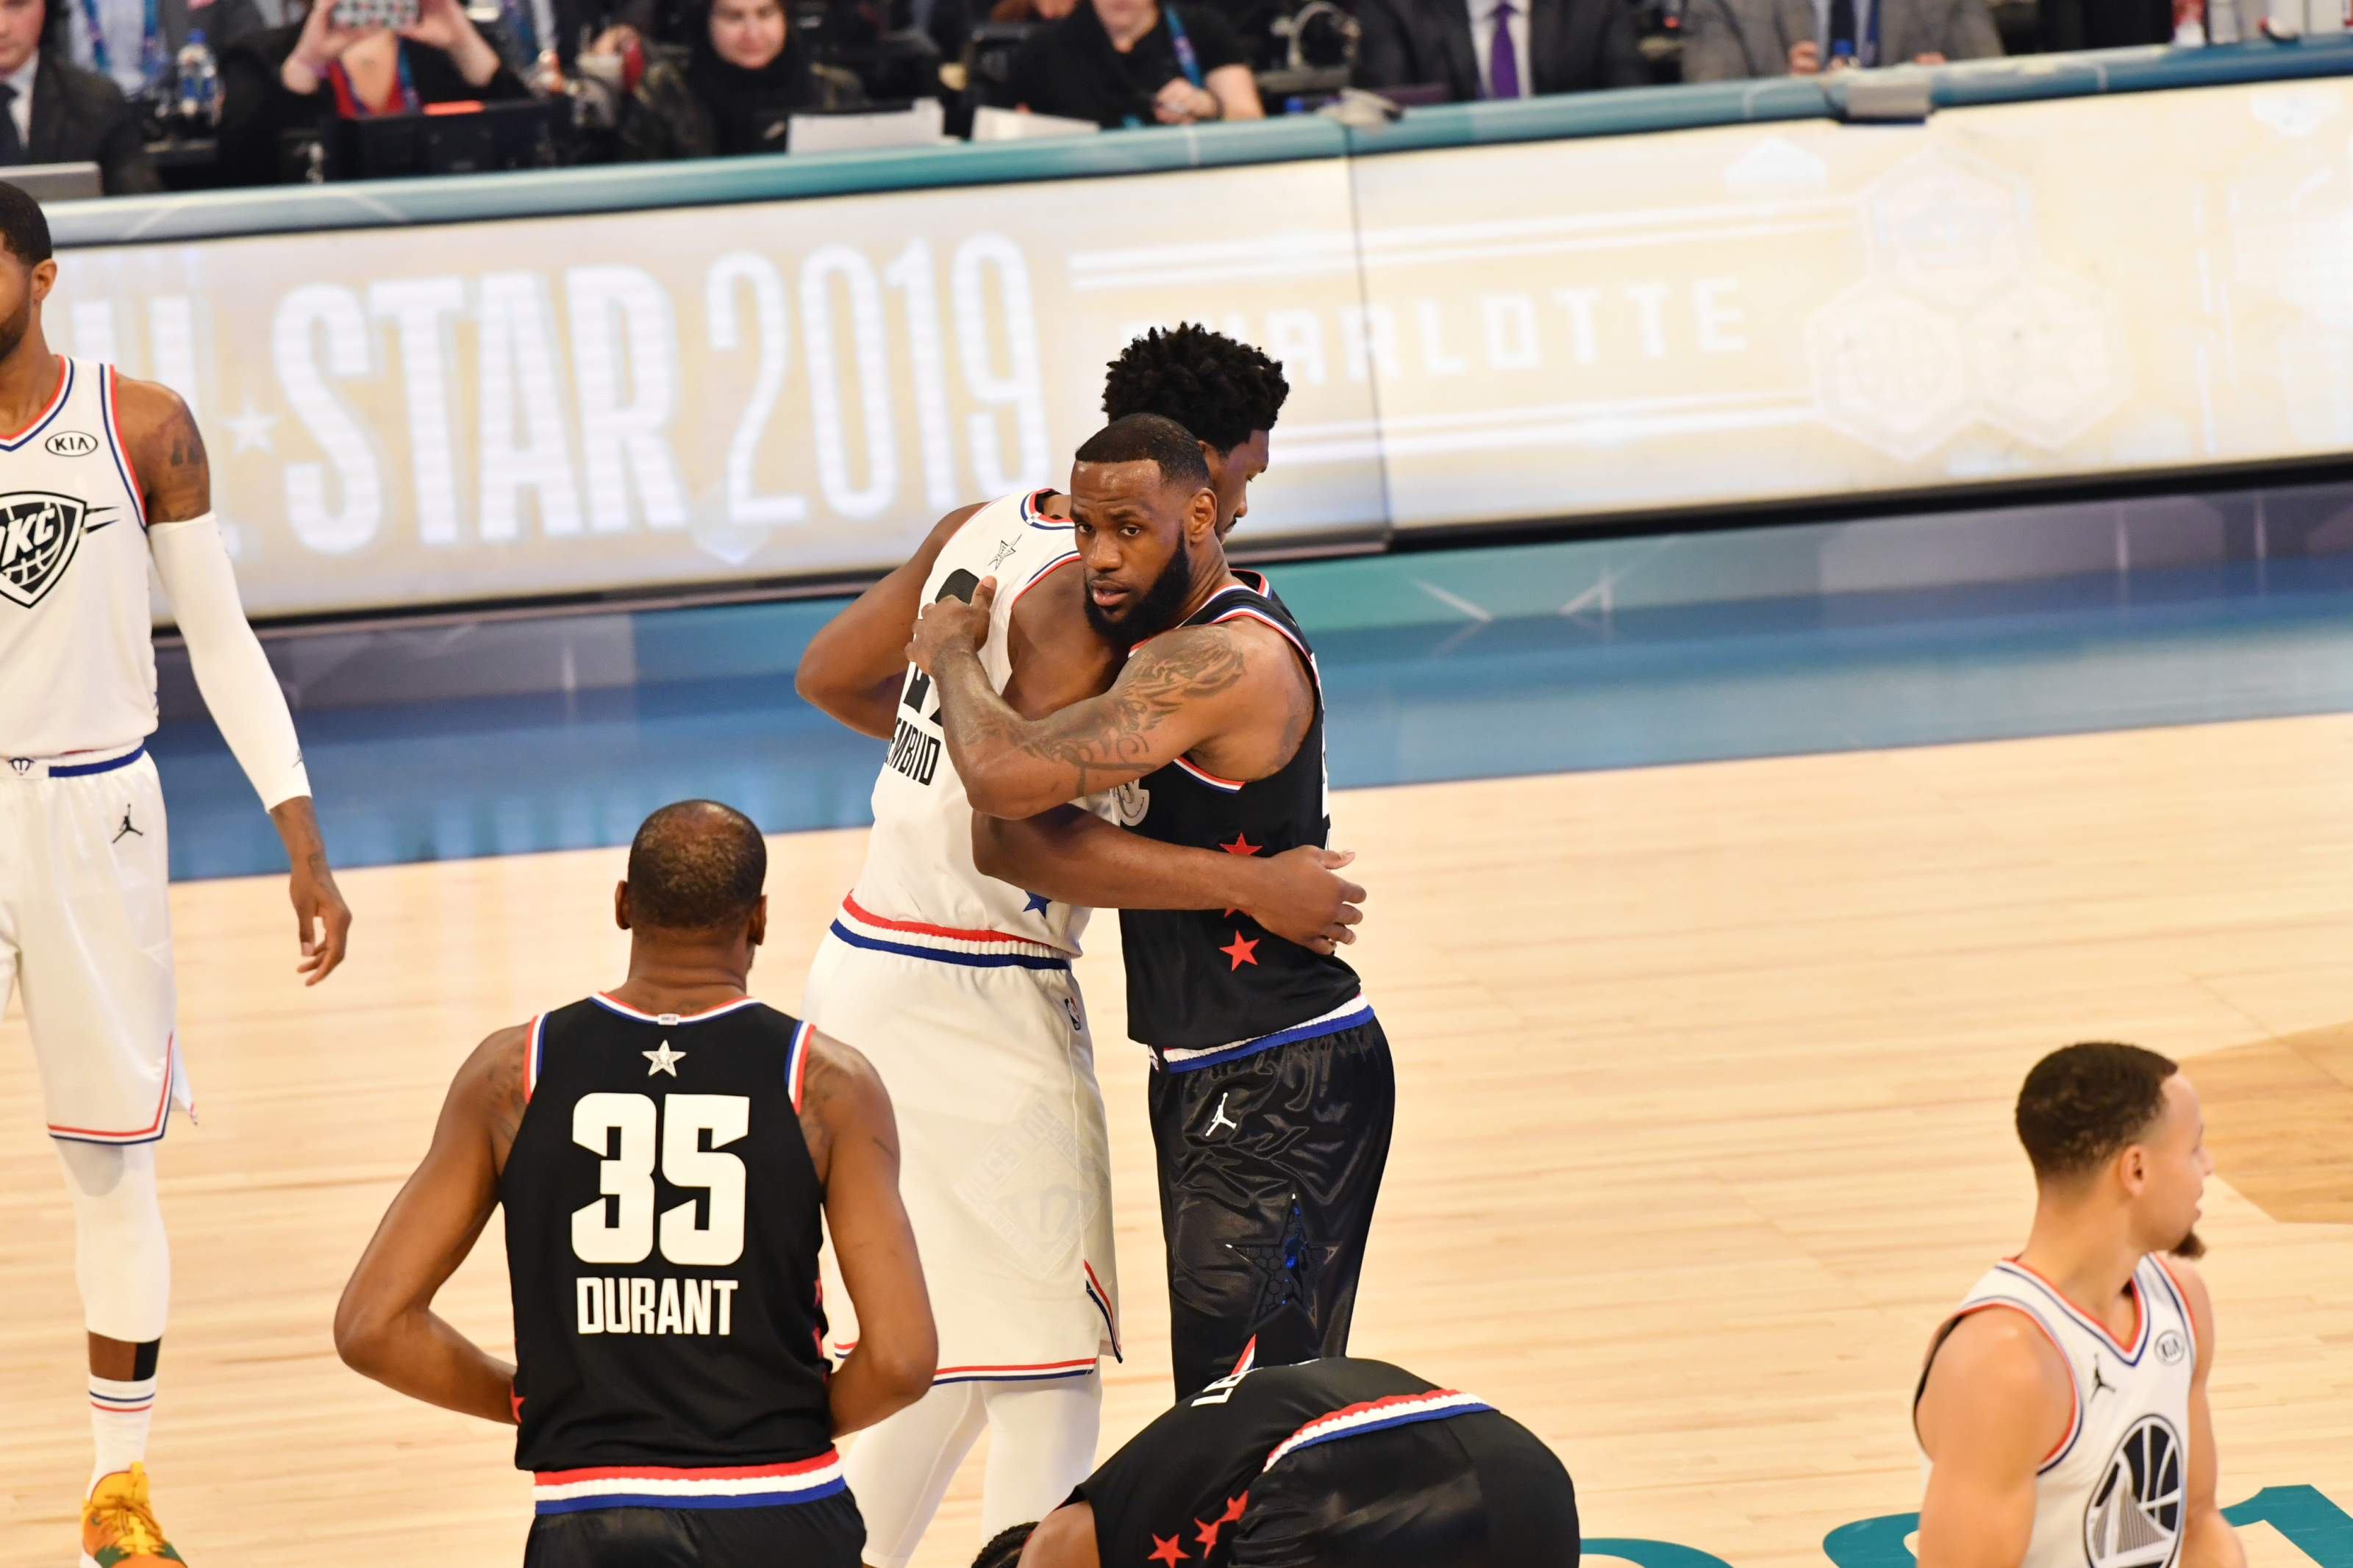 NBAAllStar on X: #TeamGiannis x #TeamLeBron Team Captains Giannis  Antetokounmpo and LeBron James will select from the #NBAAllStar player pool  in the NBA All-Star 2020 Draft Show. Thursday Feb. 6, 7:00pm/et, @NBAonTNT